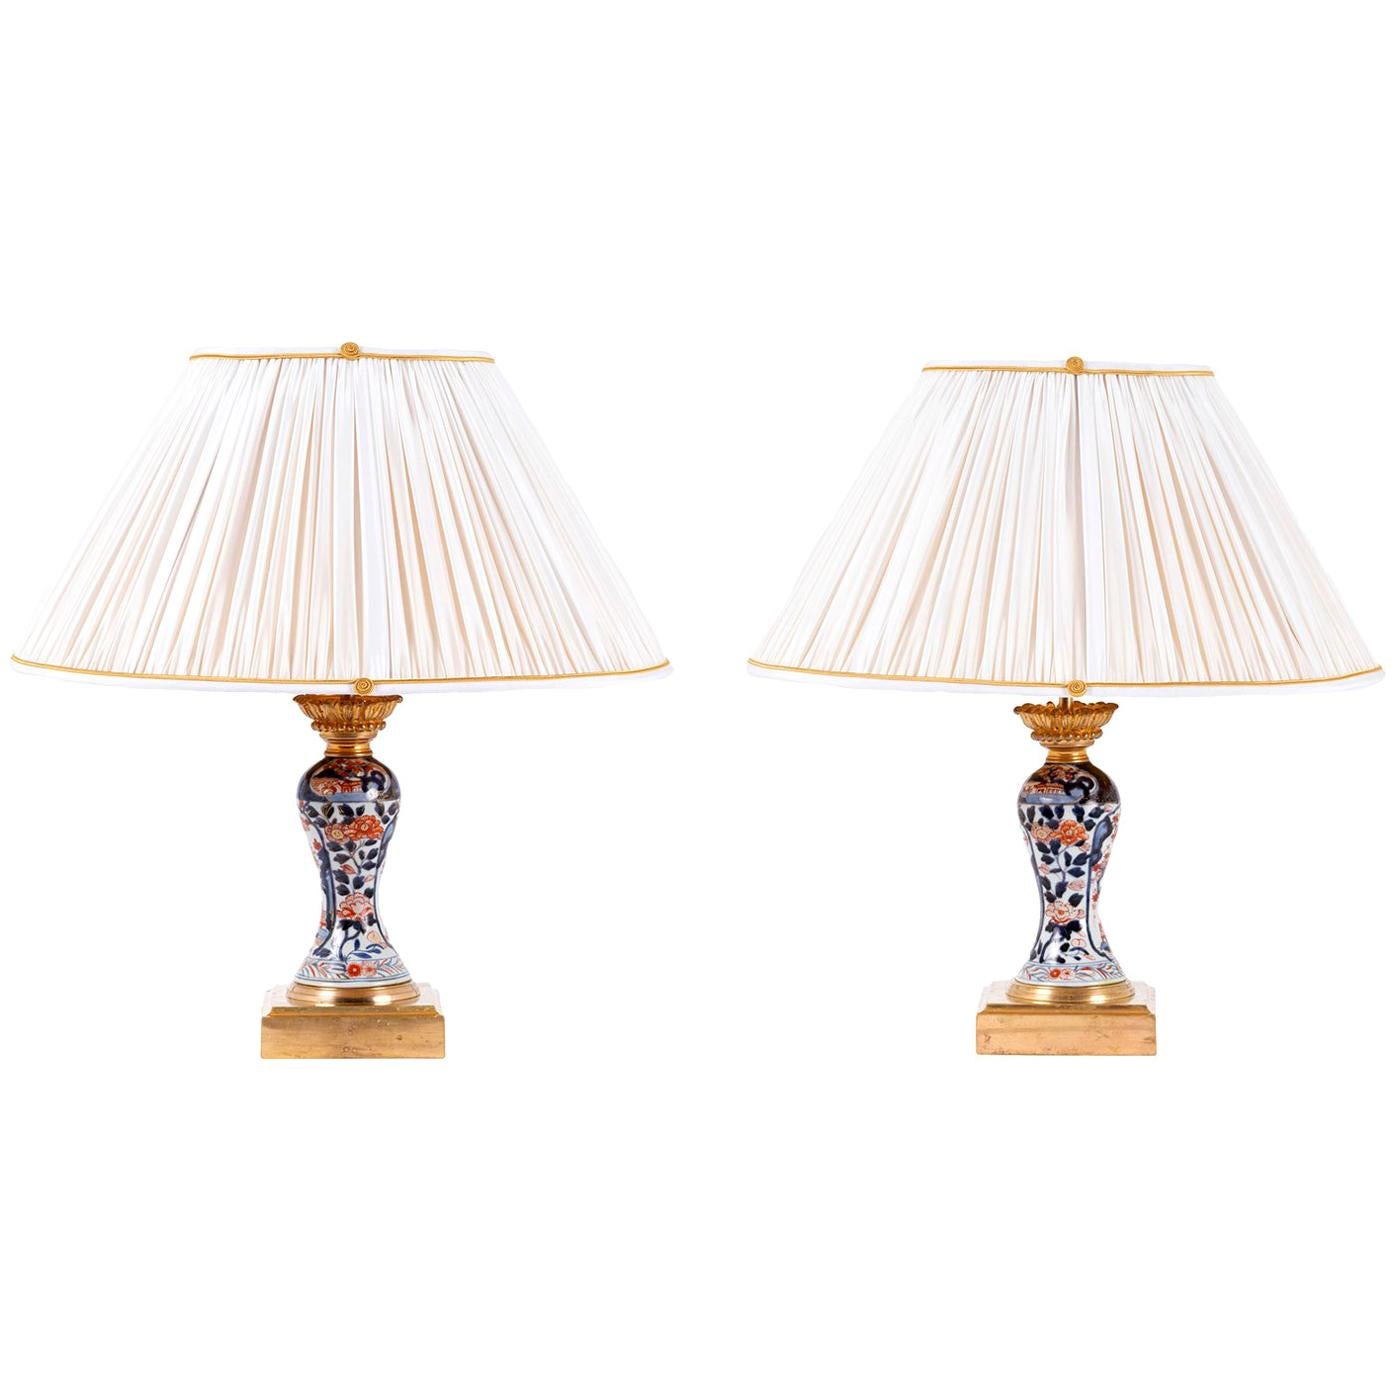 Pair of Porcelain Lamps with Imari Decor, Late 19th Century For Sale